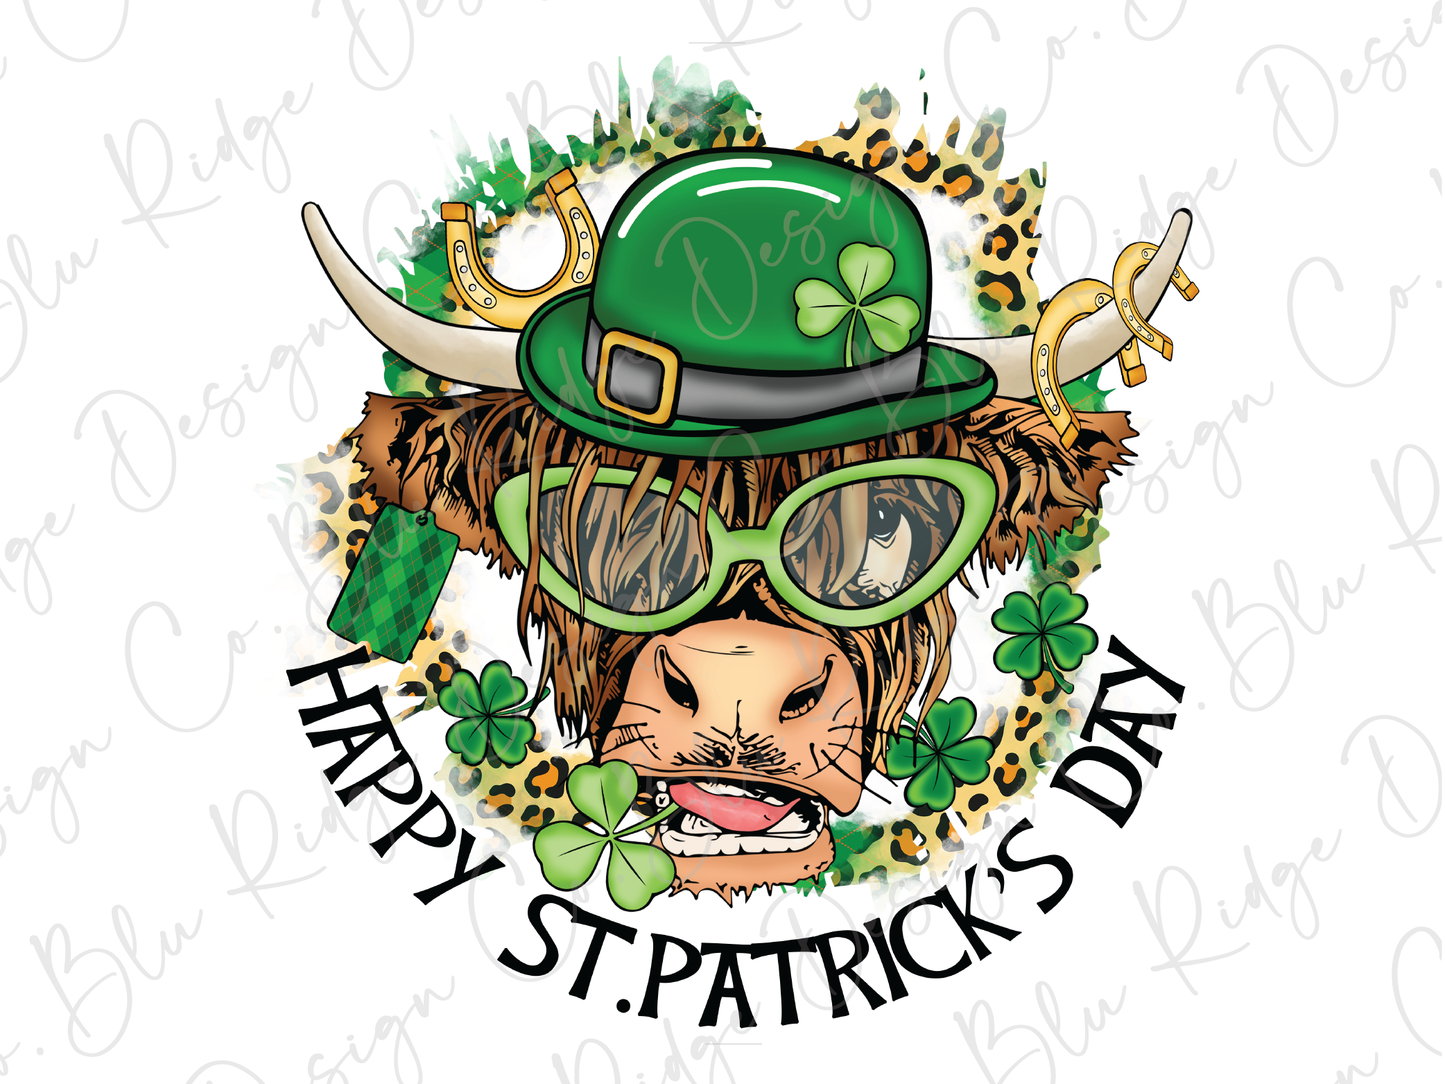 a st patrick's day design with a green hat, glasses, and a